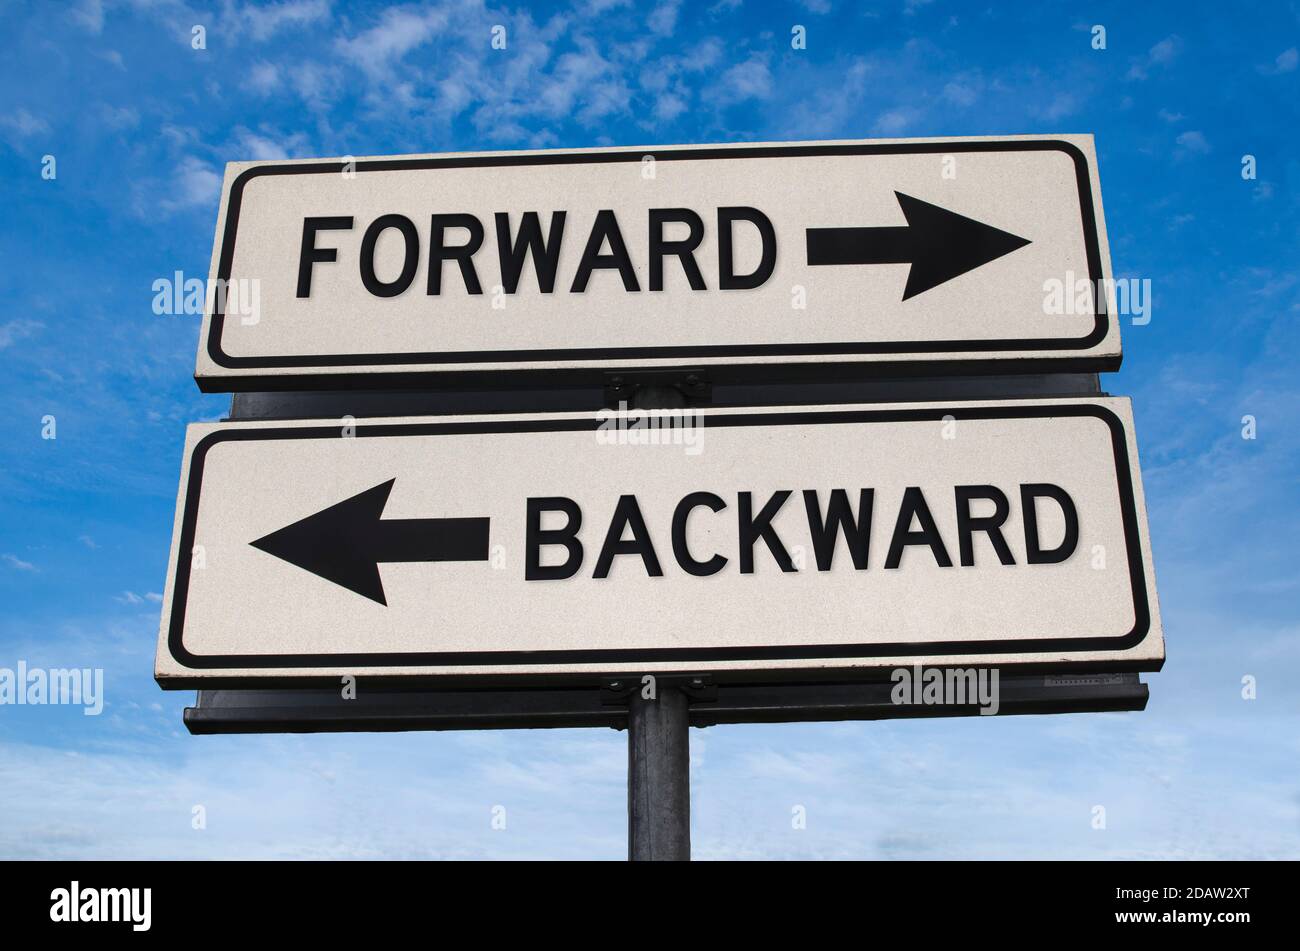 Forward vs backward. White two street signs with arrow on metal pole with word. Directional road. Crossroads Road Sign, Two Arrow. Blue sky background Stock Photo